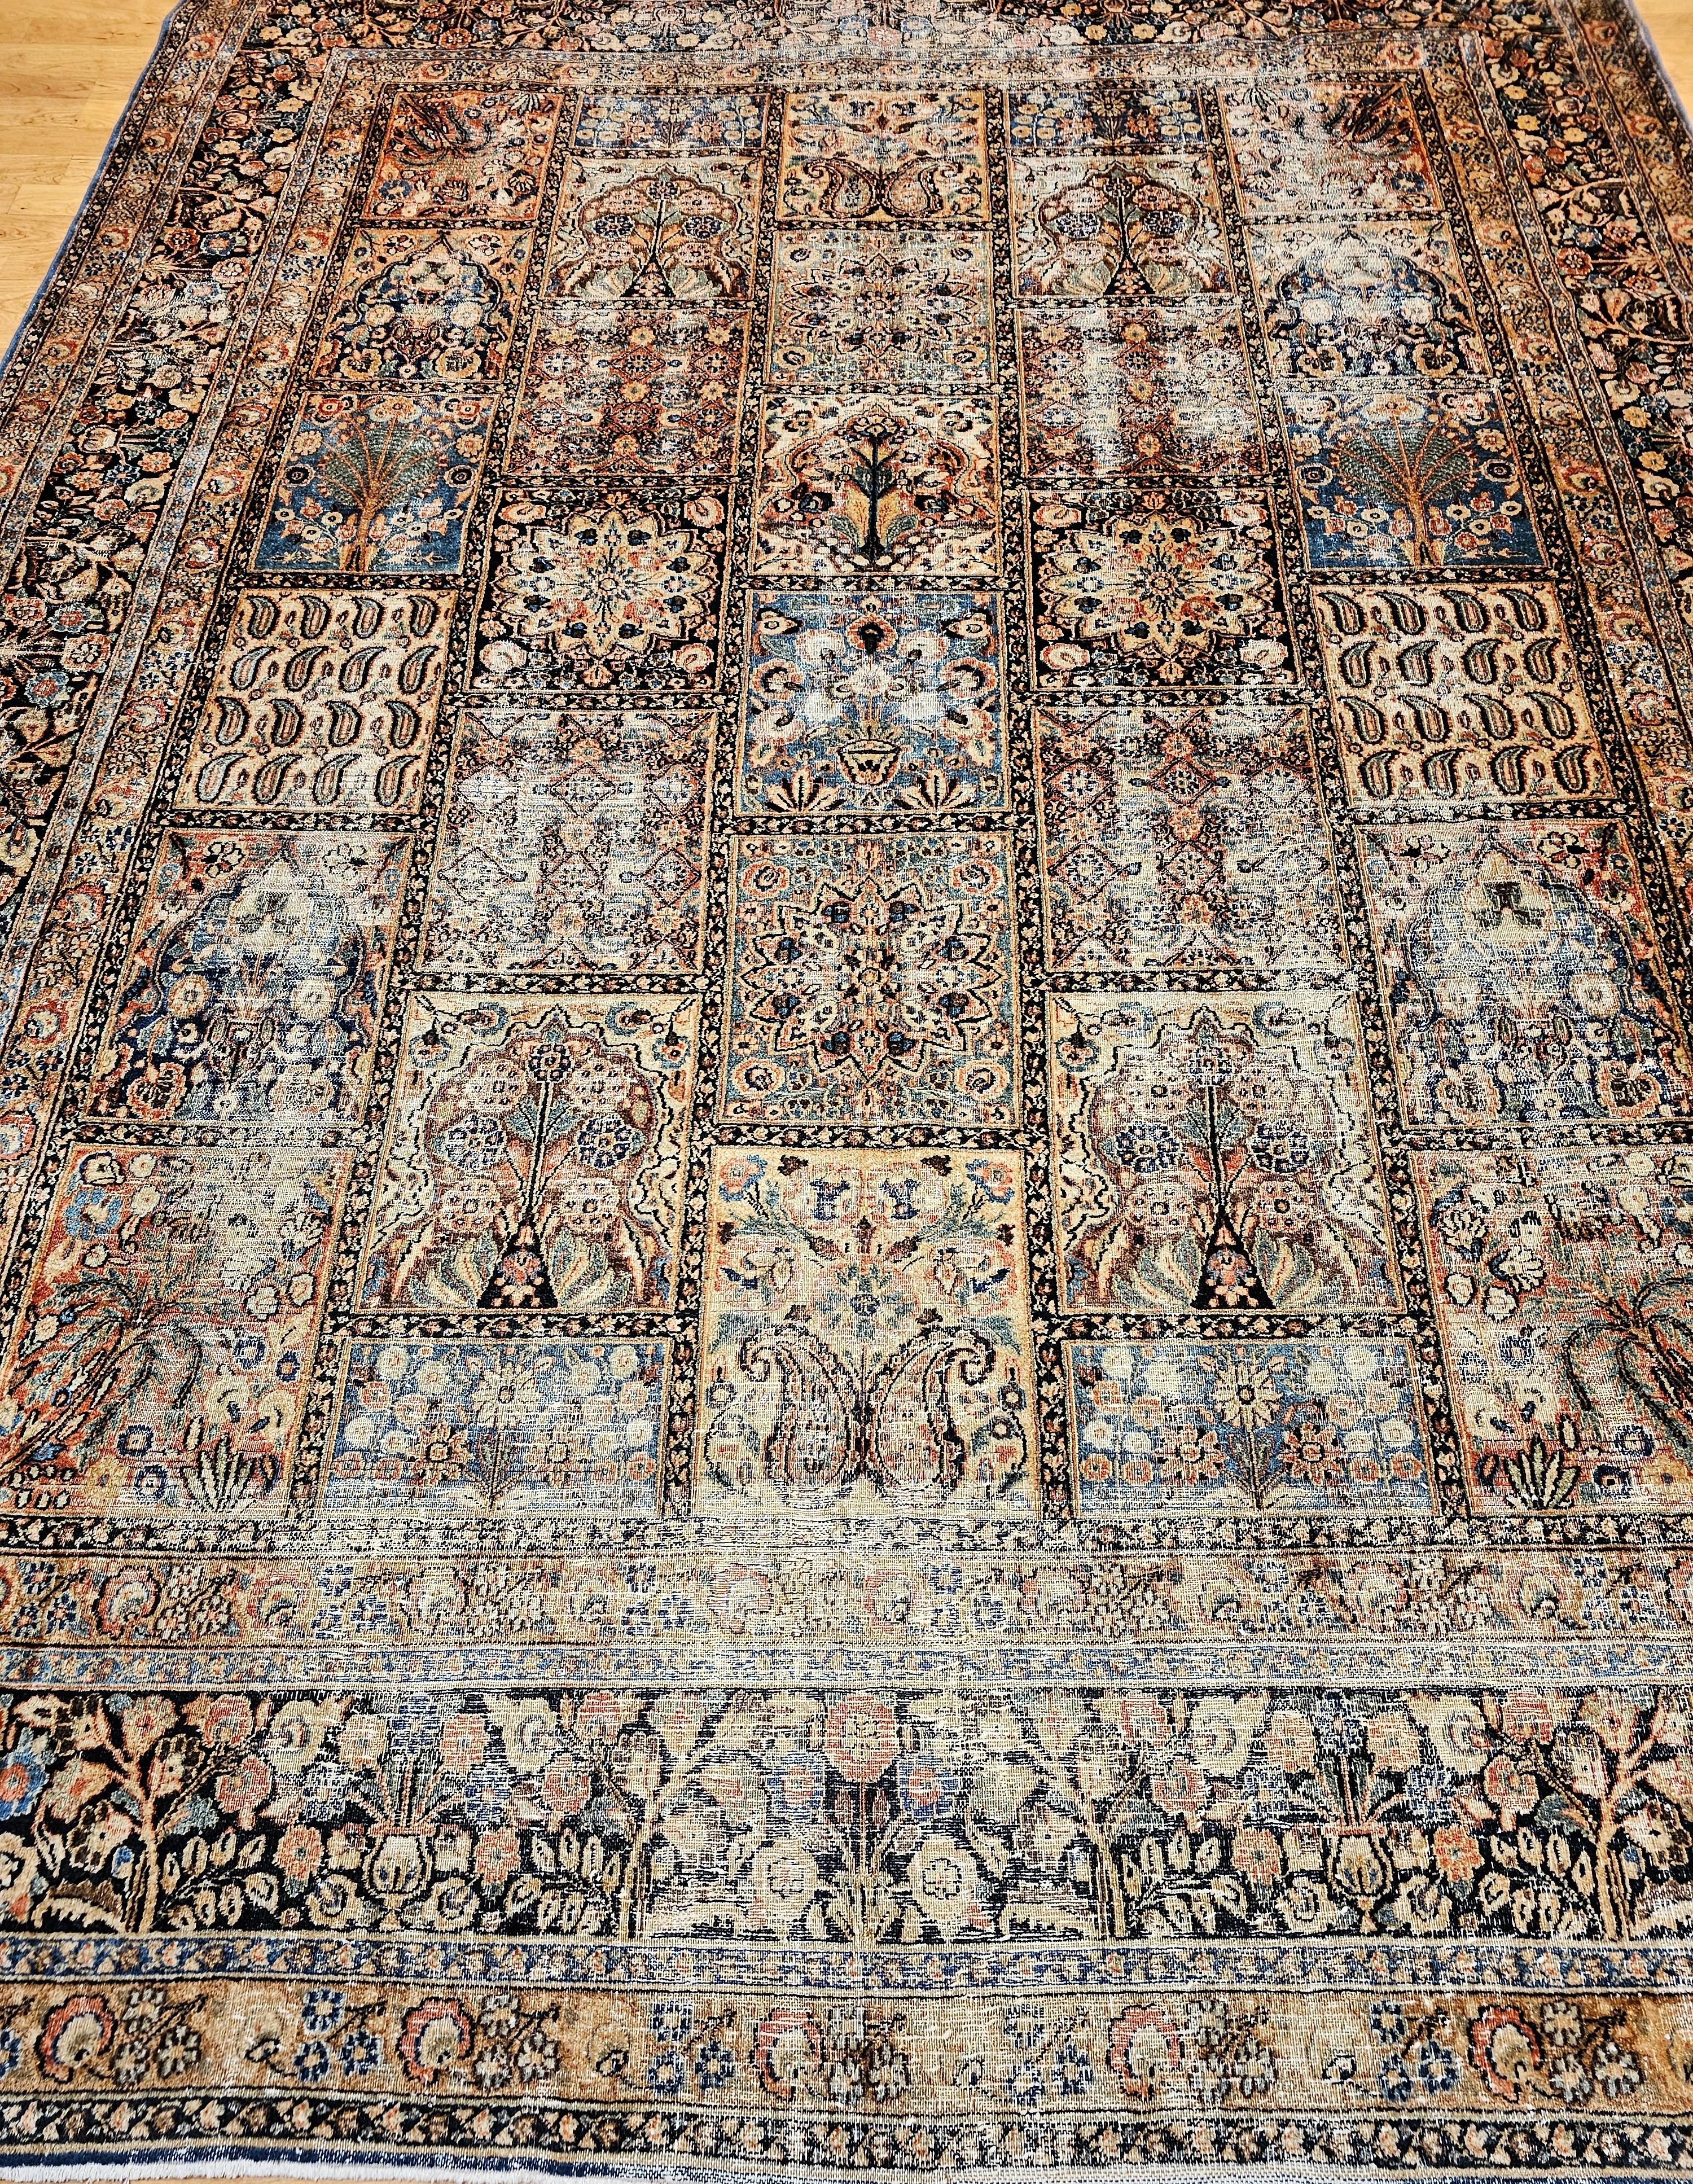  Magnificent late 19th century/early 20th century Persian Khorassan rug in an allover panel design in green, royal blue, burgundy, ivory, brown and camel colors.  The unique offset panel pattern adds to the charm of this beautiful rug.  The design